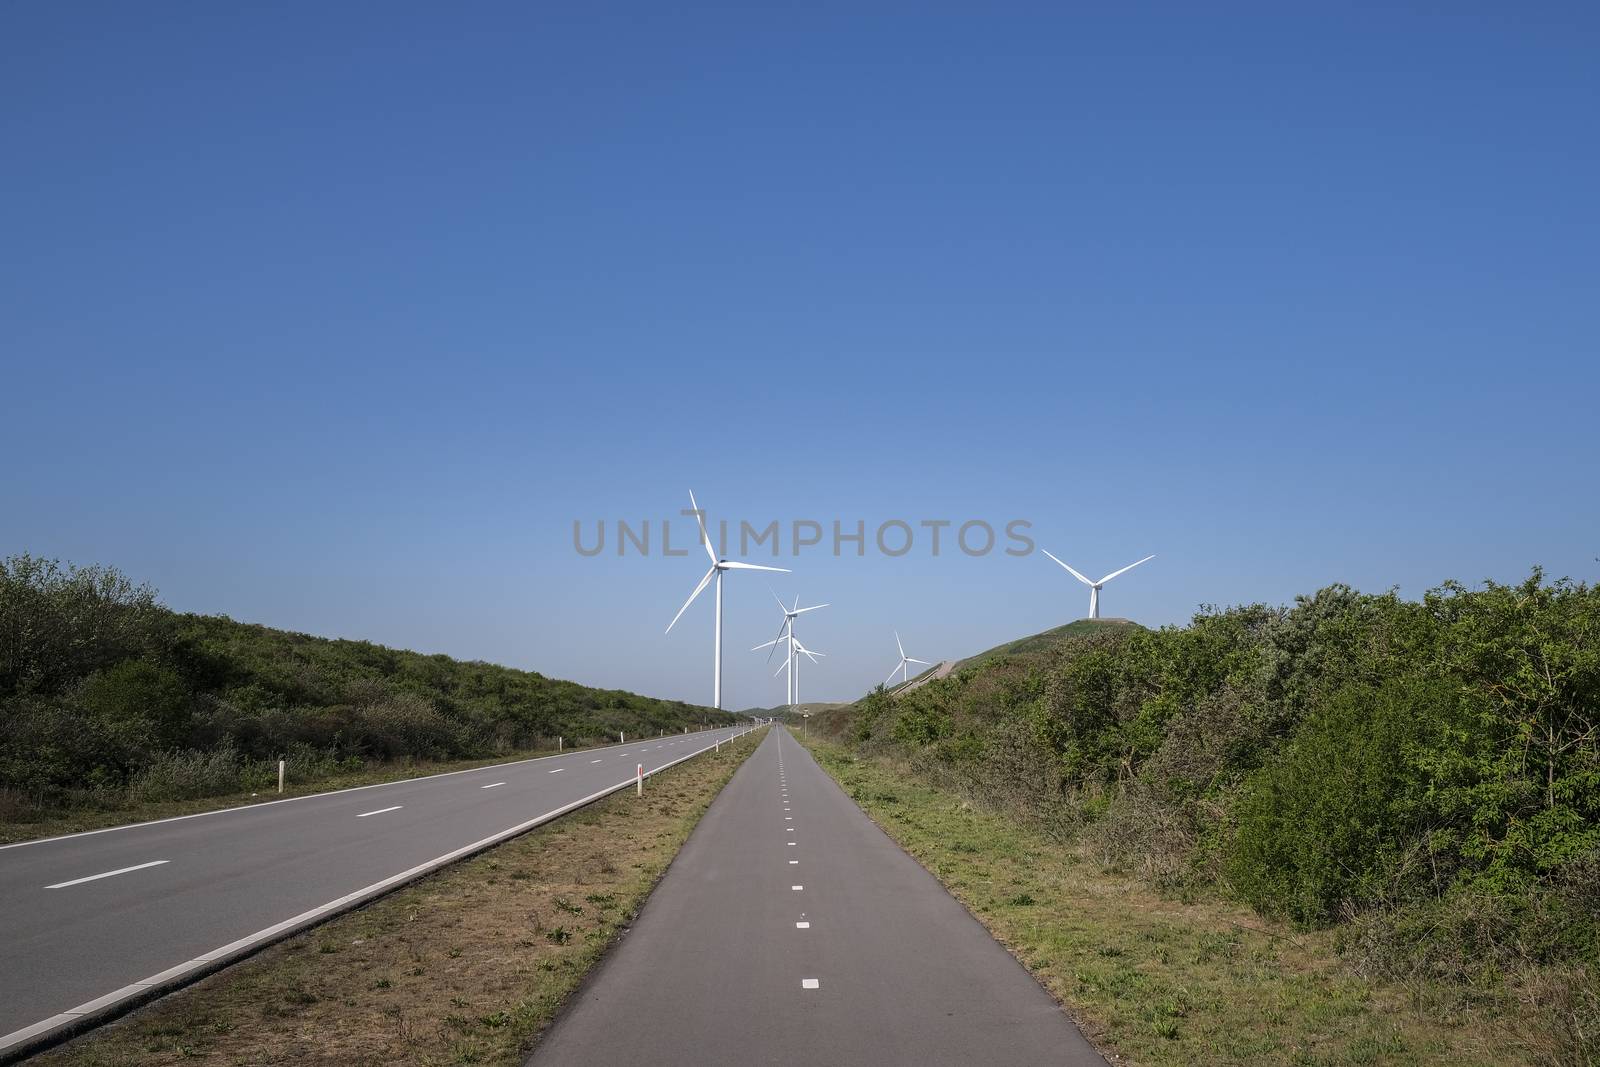 A Modern Wind Farm consisting of Wind Turbines with Two and Thre by Tjeerdkruse